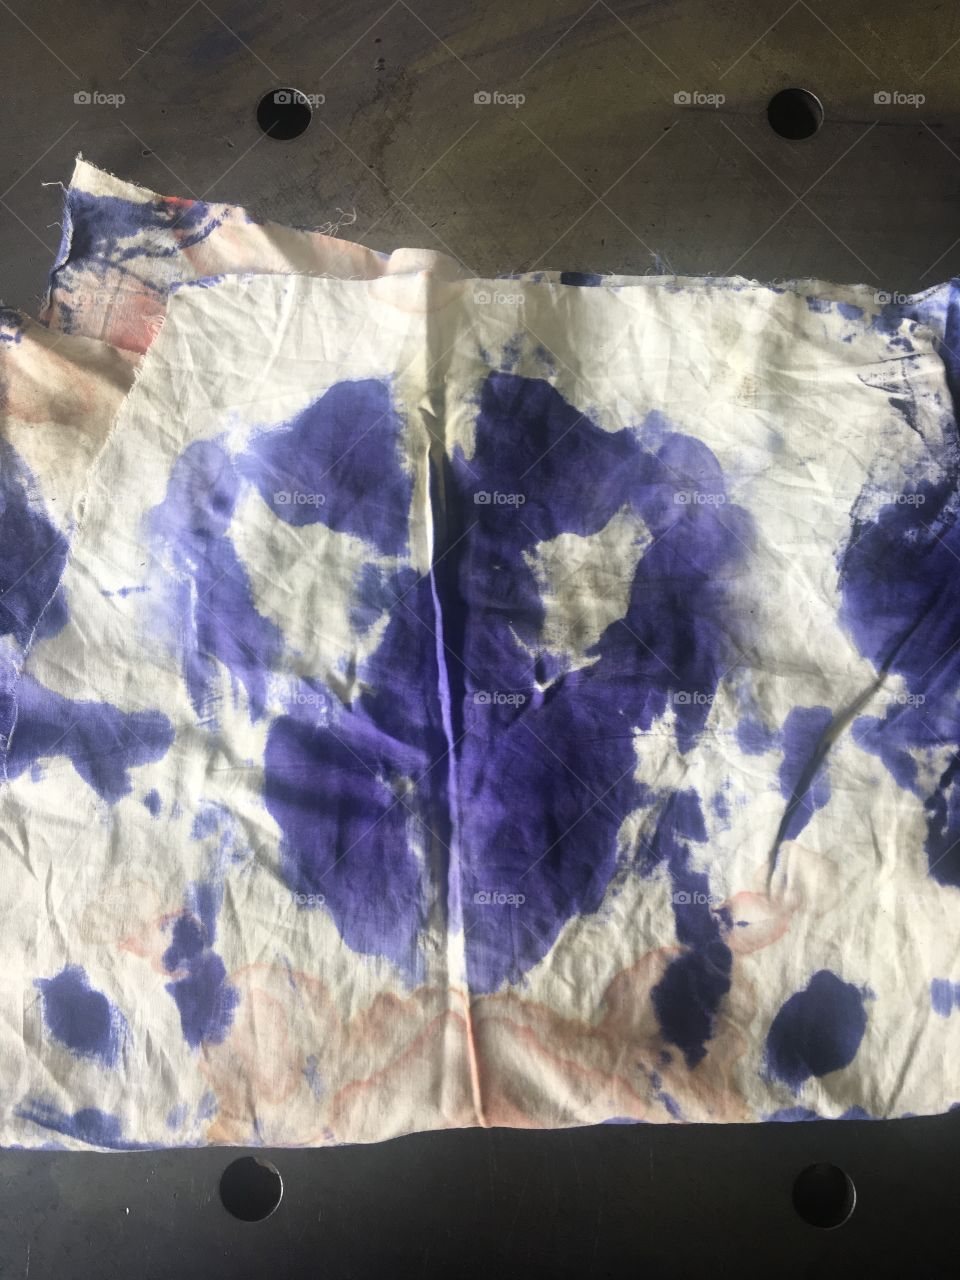 Accidental stain